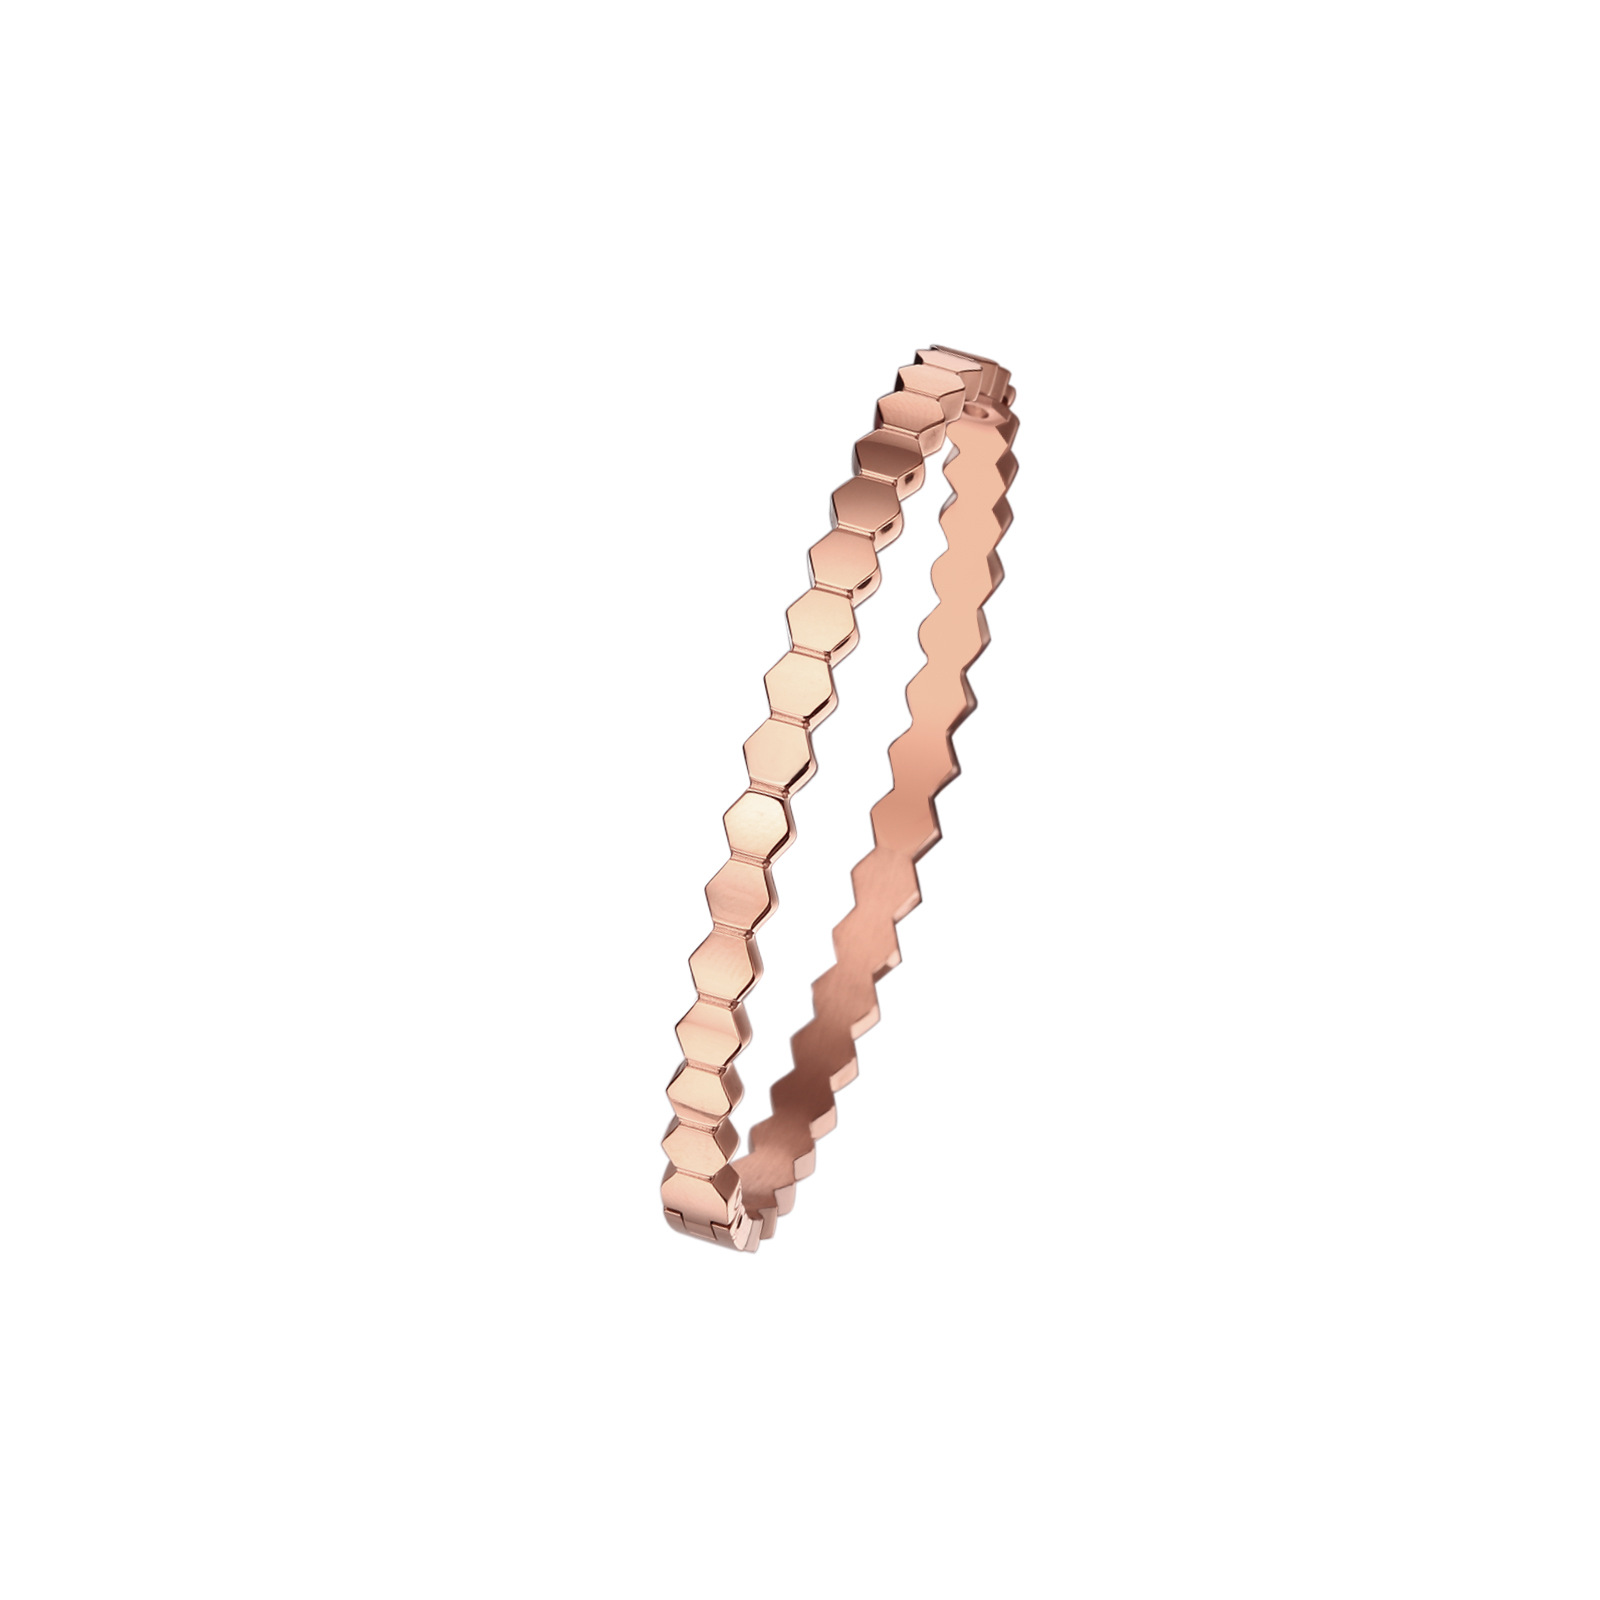 Rose gold without diamonds